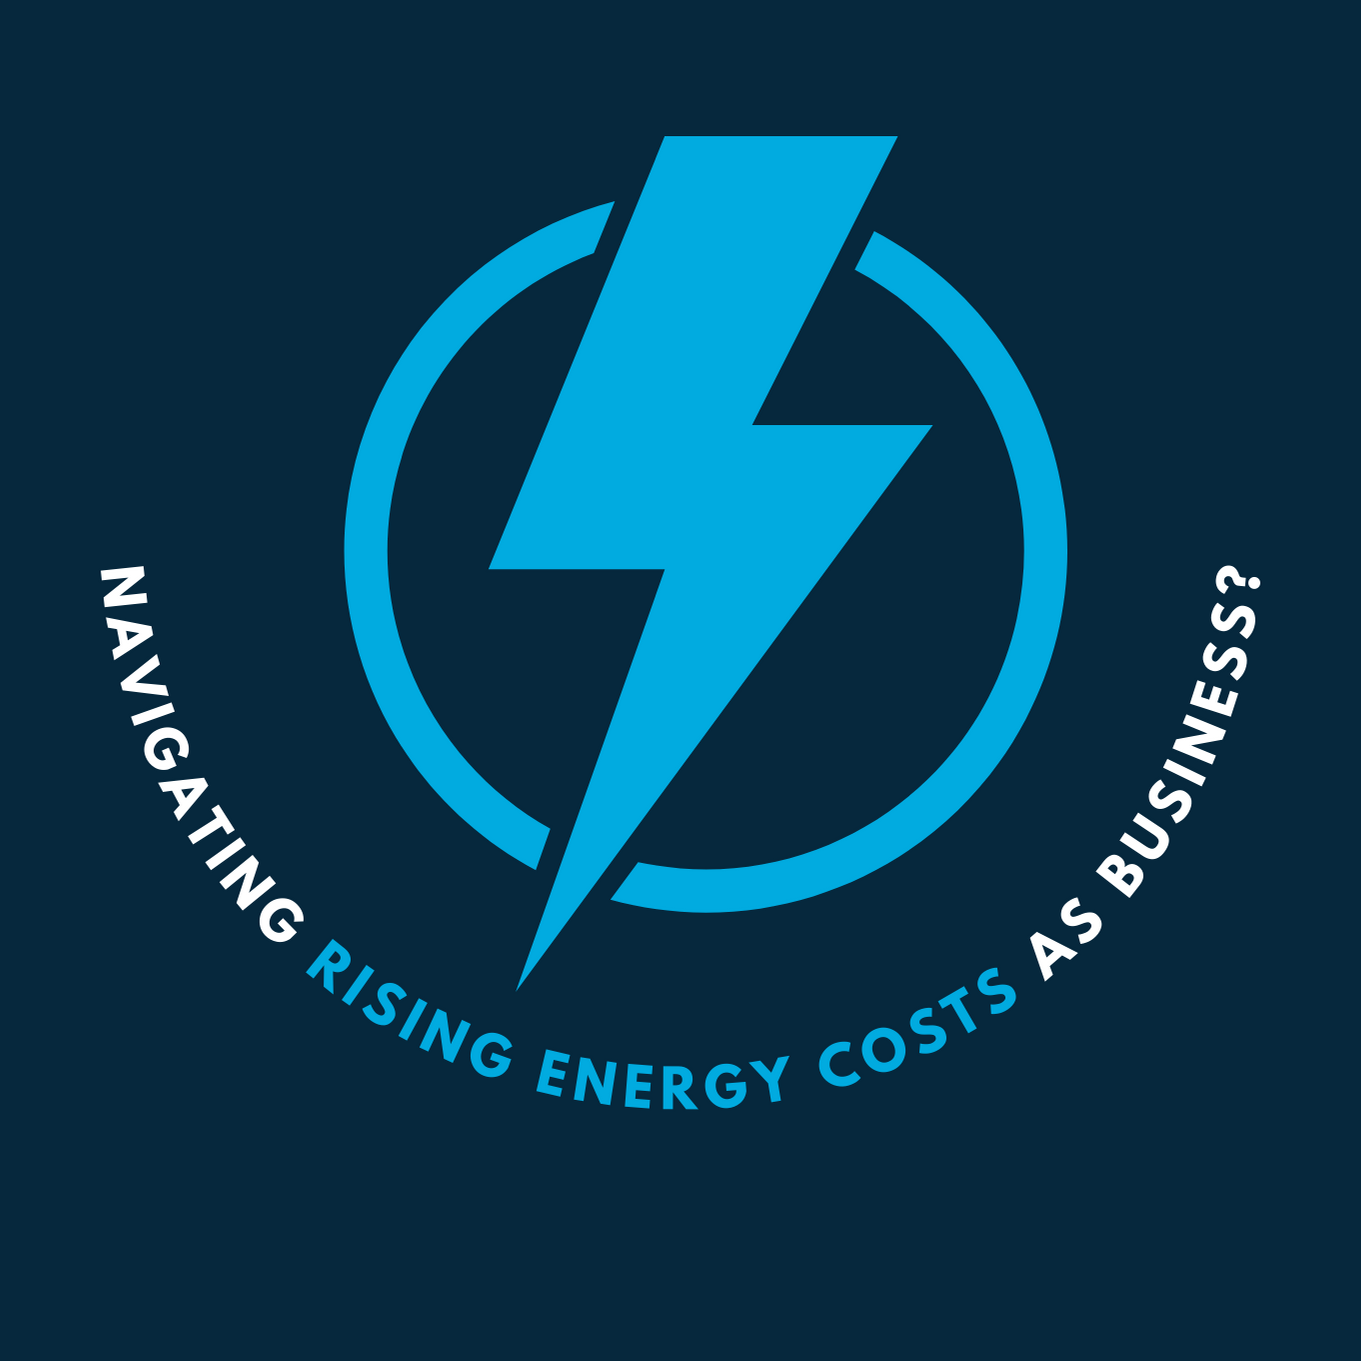 Rising energy costs in Nottingham and Leicester